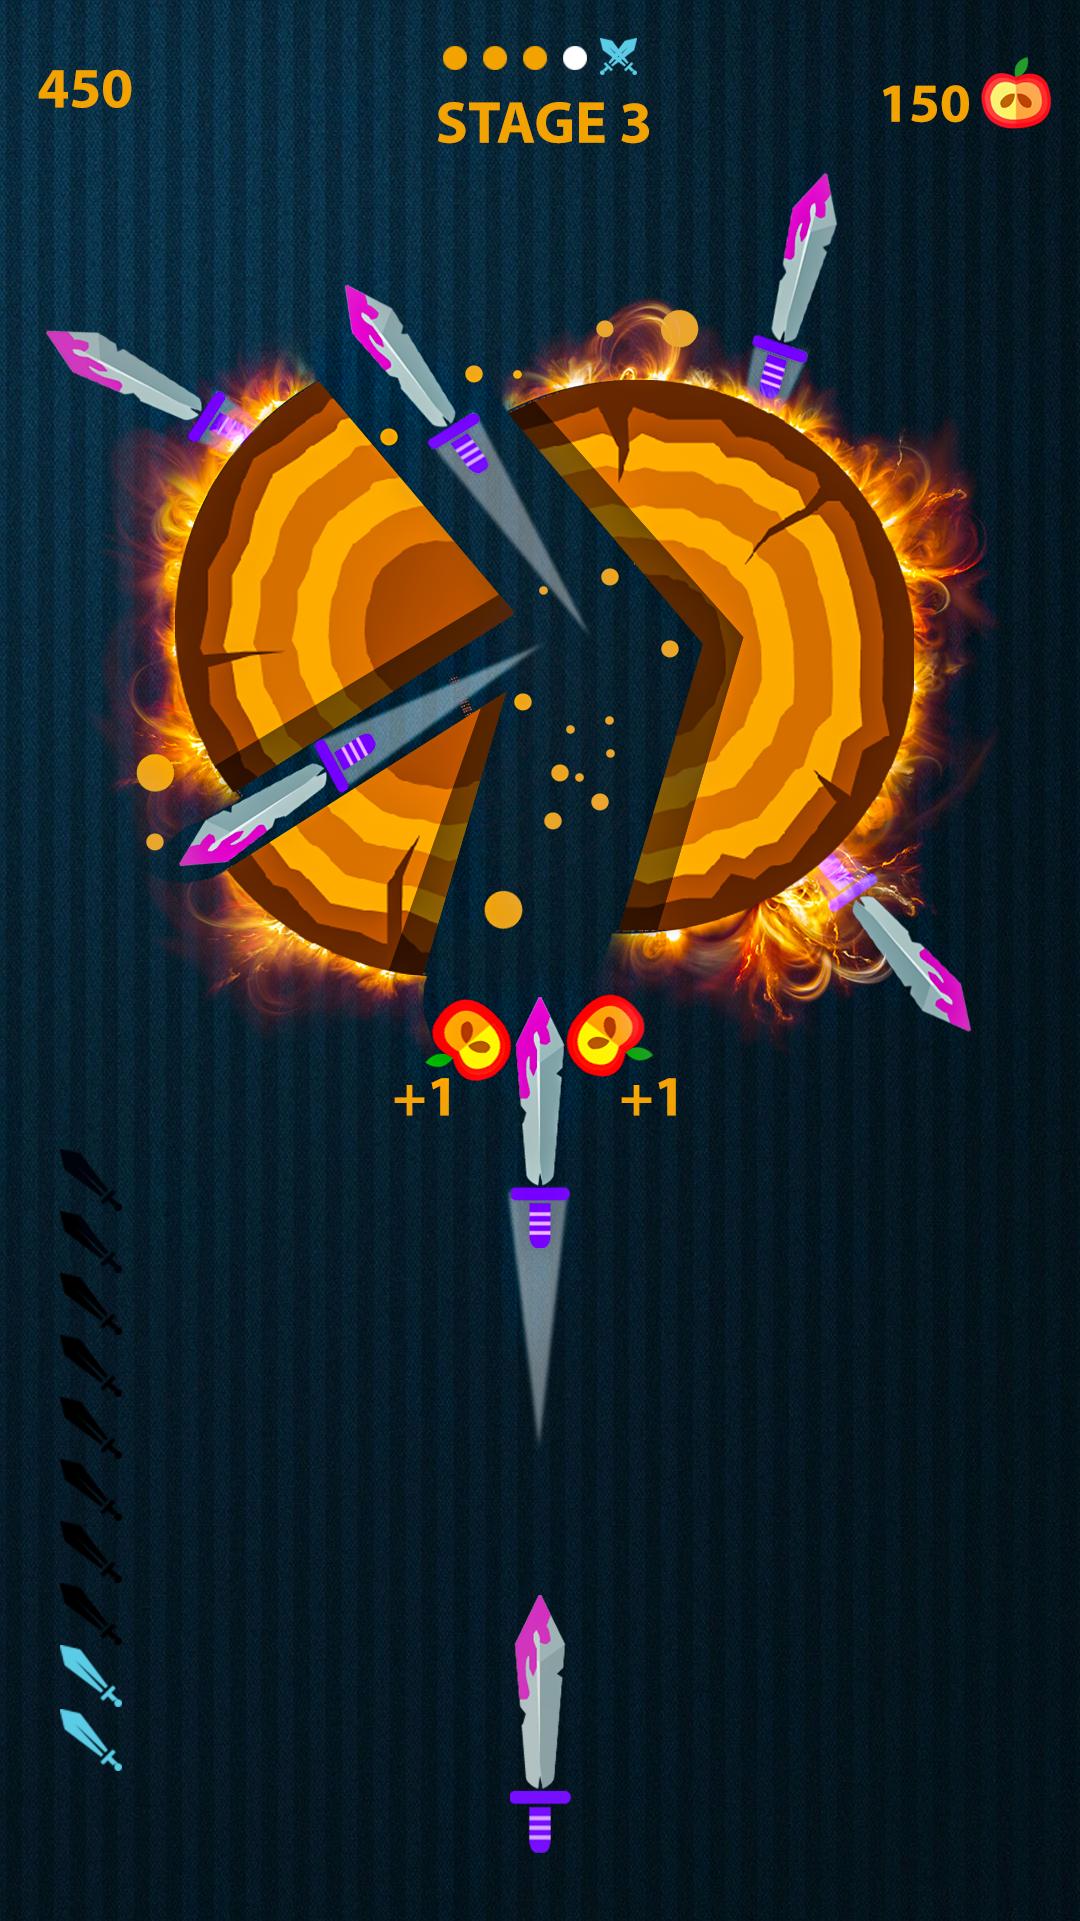 Idle Flippy Knife Knife Throwing Games For Android Apk Download